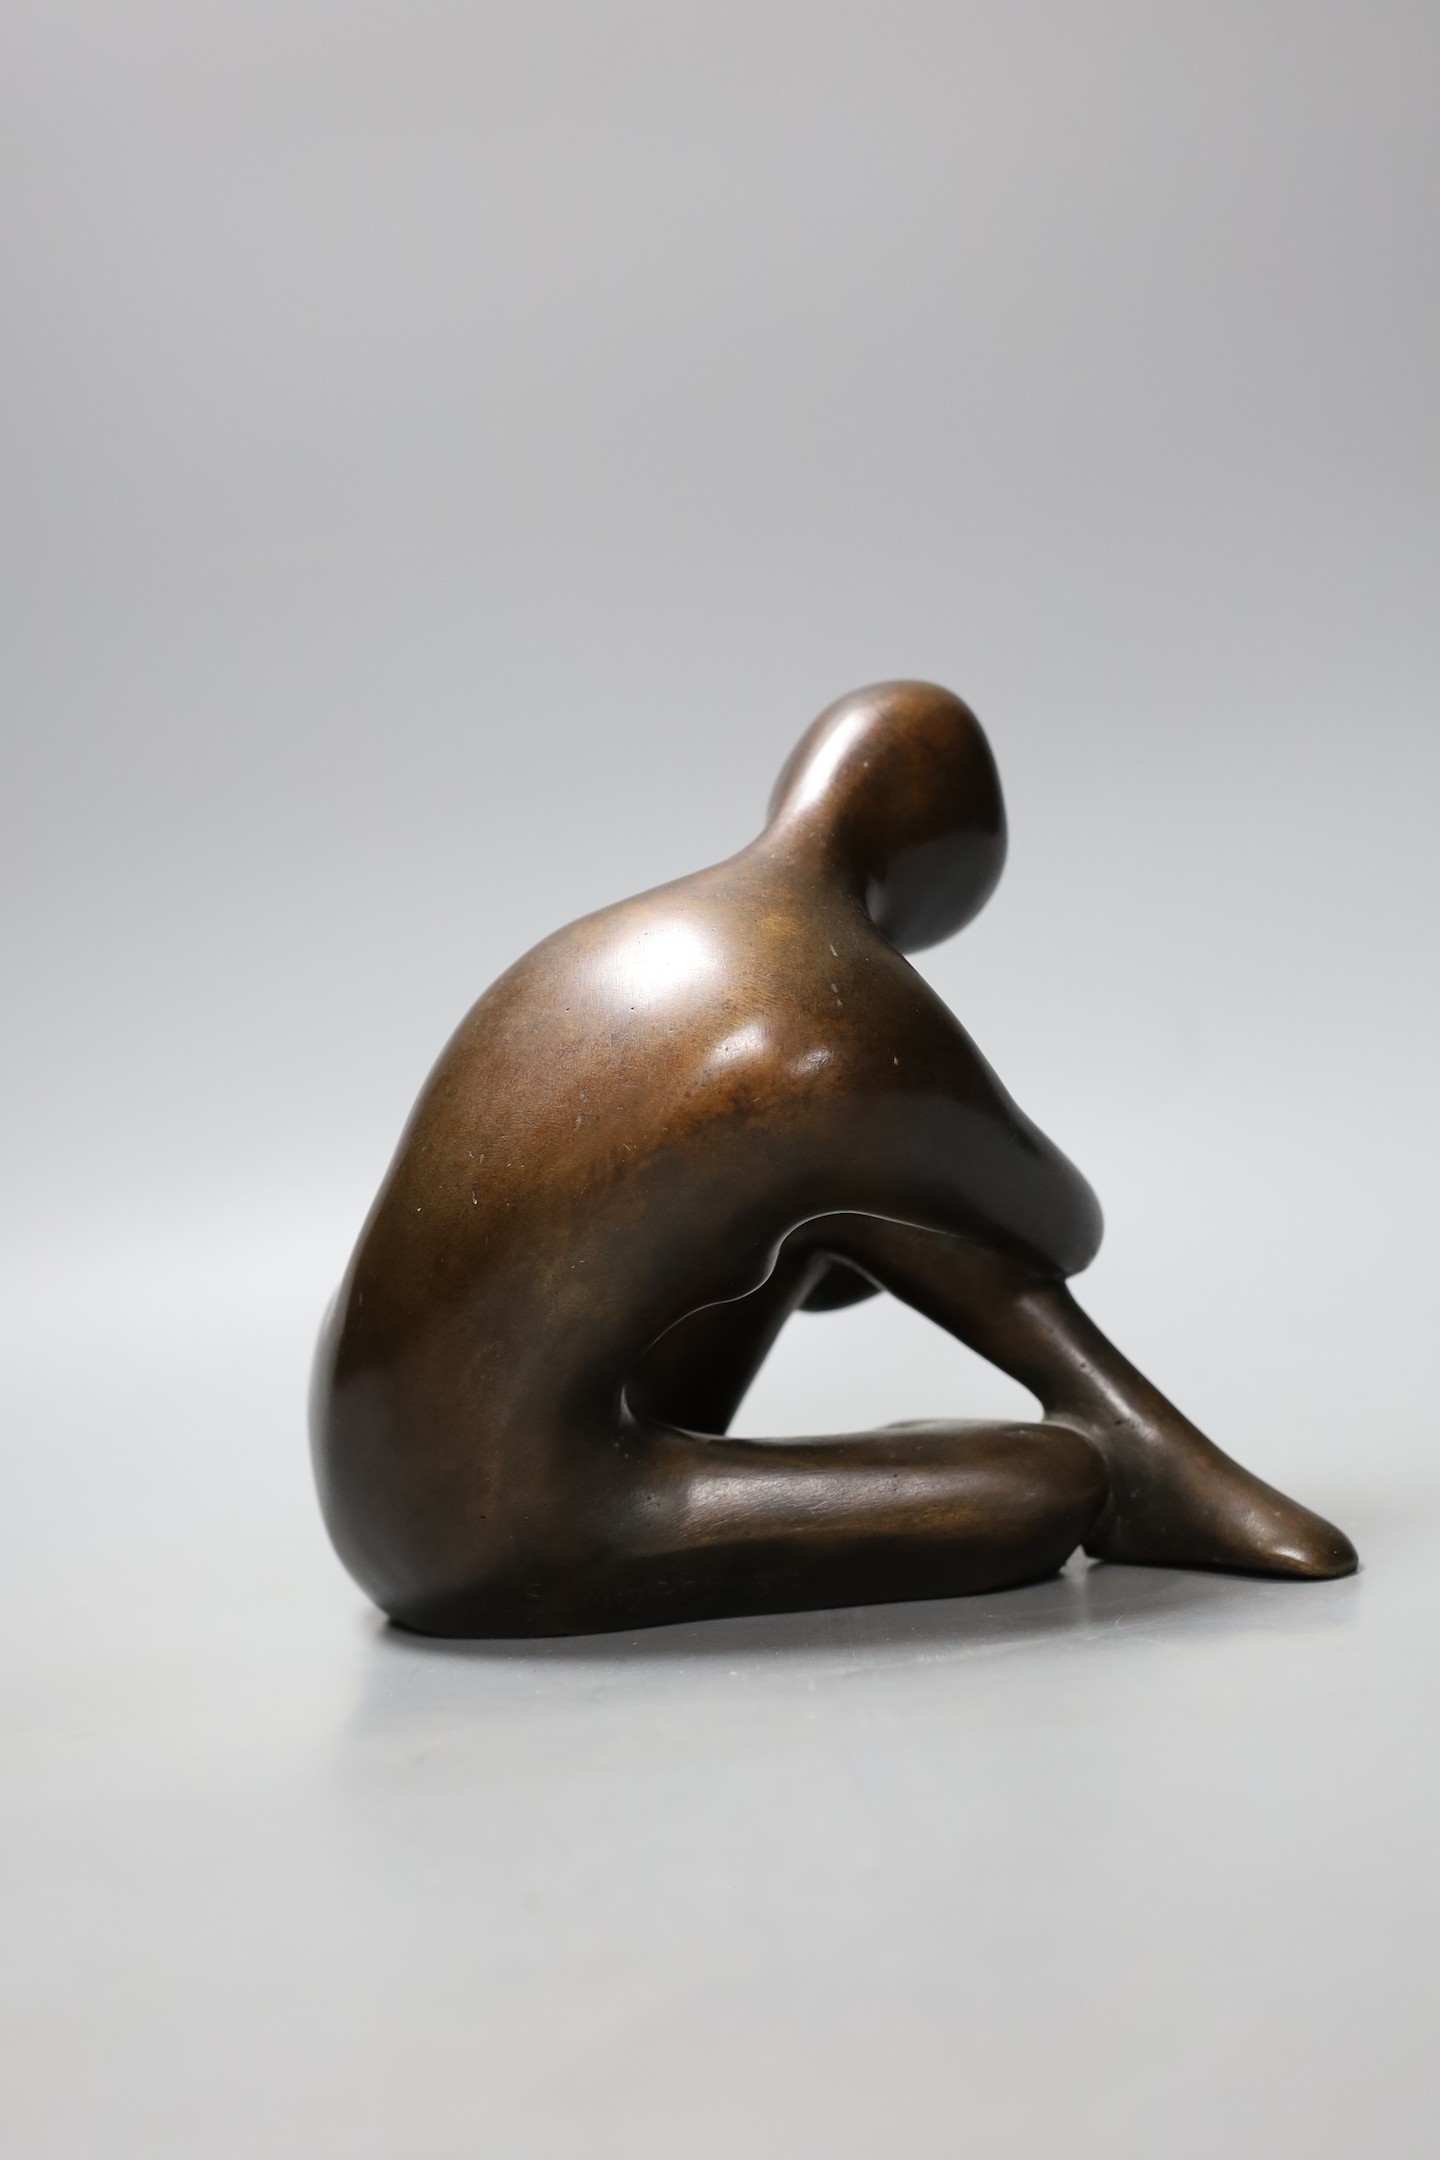 Leslie John Summers, A bronze abstract seated figure, 17.5cm tall - Image 2 of 4